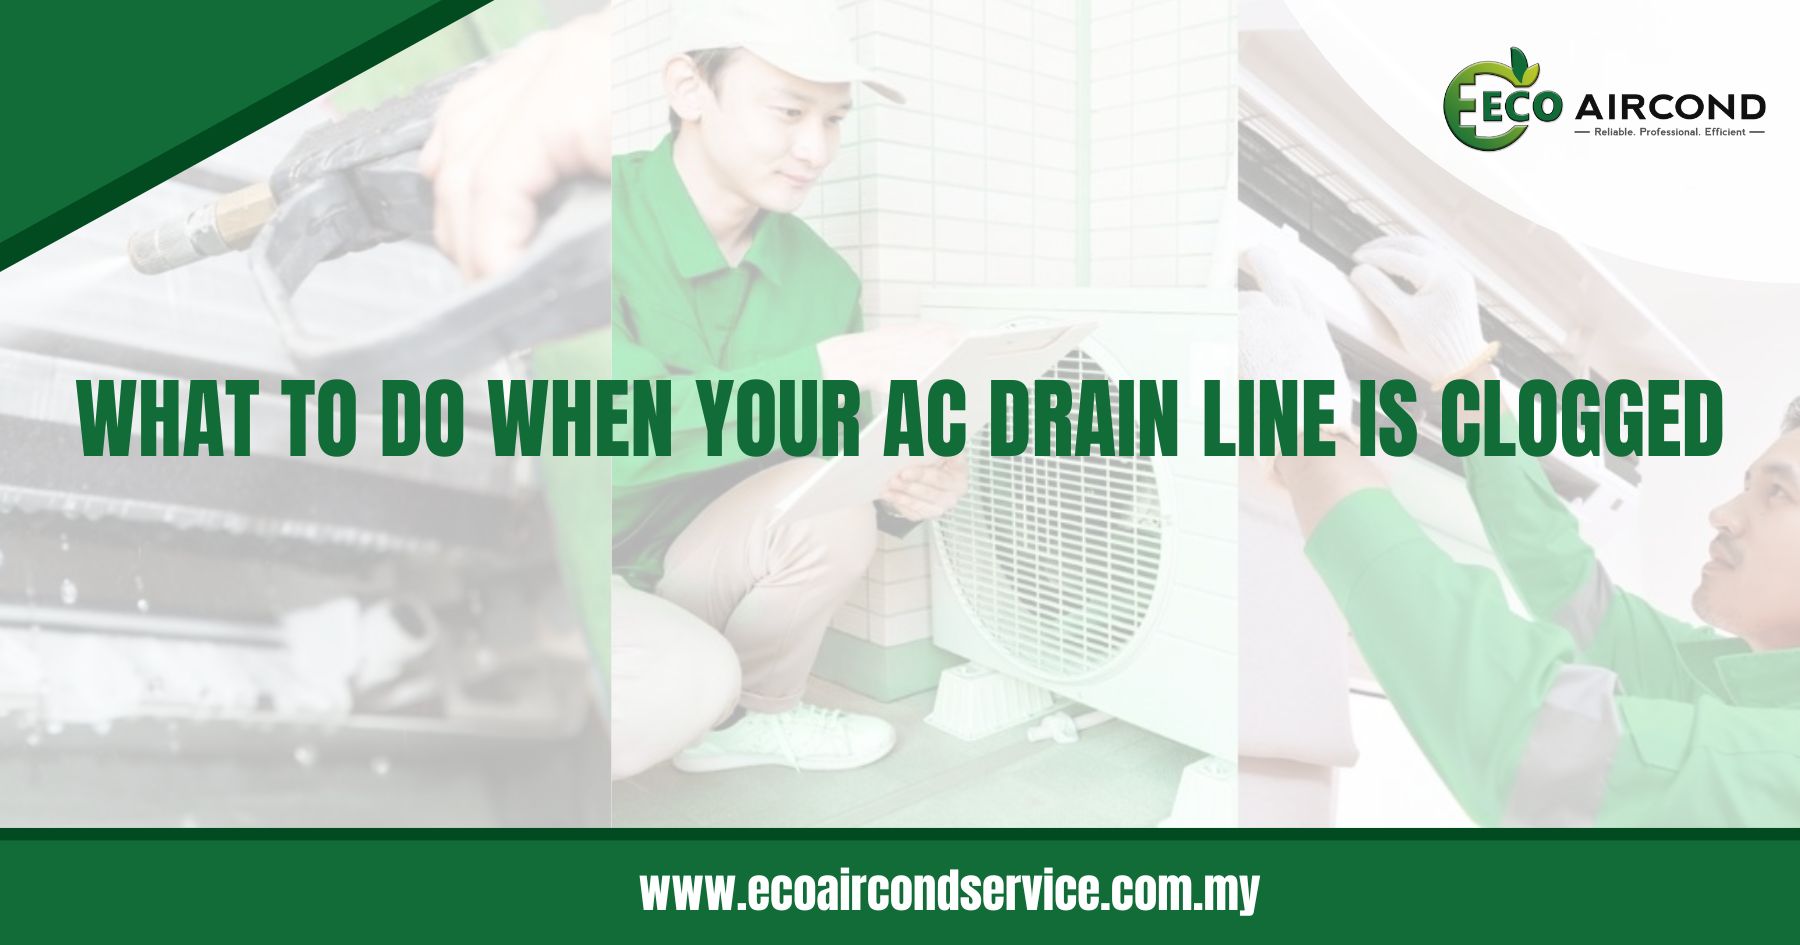 What to Do When Your AC Drain Line is Clogged